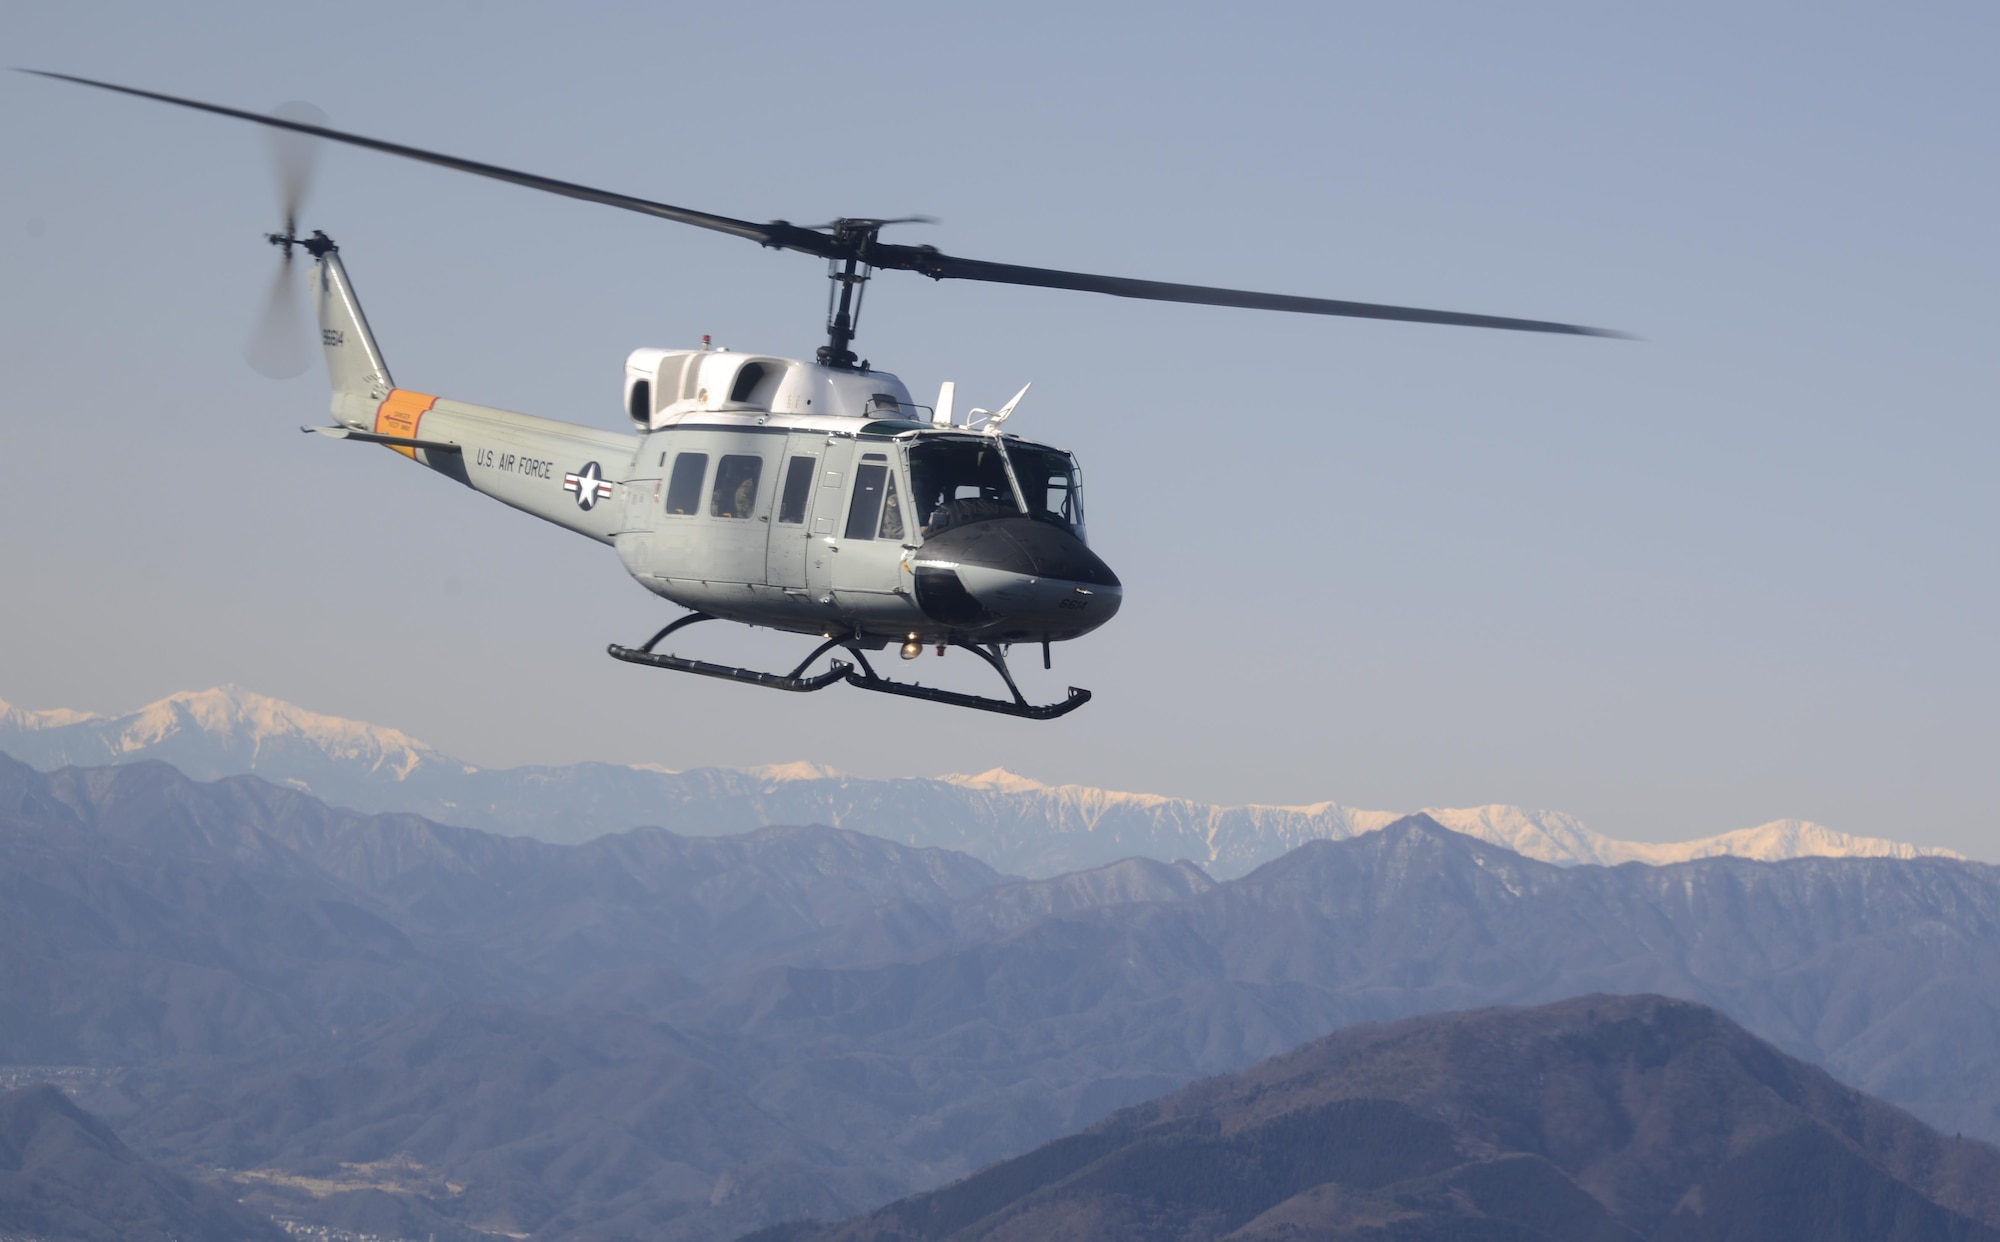 A UH-1N Iroquois helicopter flies over Japanese mountaintops on its way back to Yokota Air Base, Japan, Jan. 29, 2015, after completing a bilateral training mission. U.S. Airmen trained with Japan Ground Self-Defense Force members during the mission. (U.S. Air Force photo/Senior Airman Michael Washburn) 